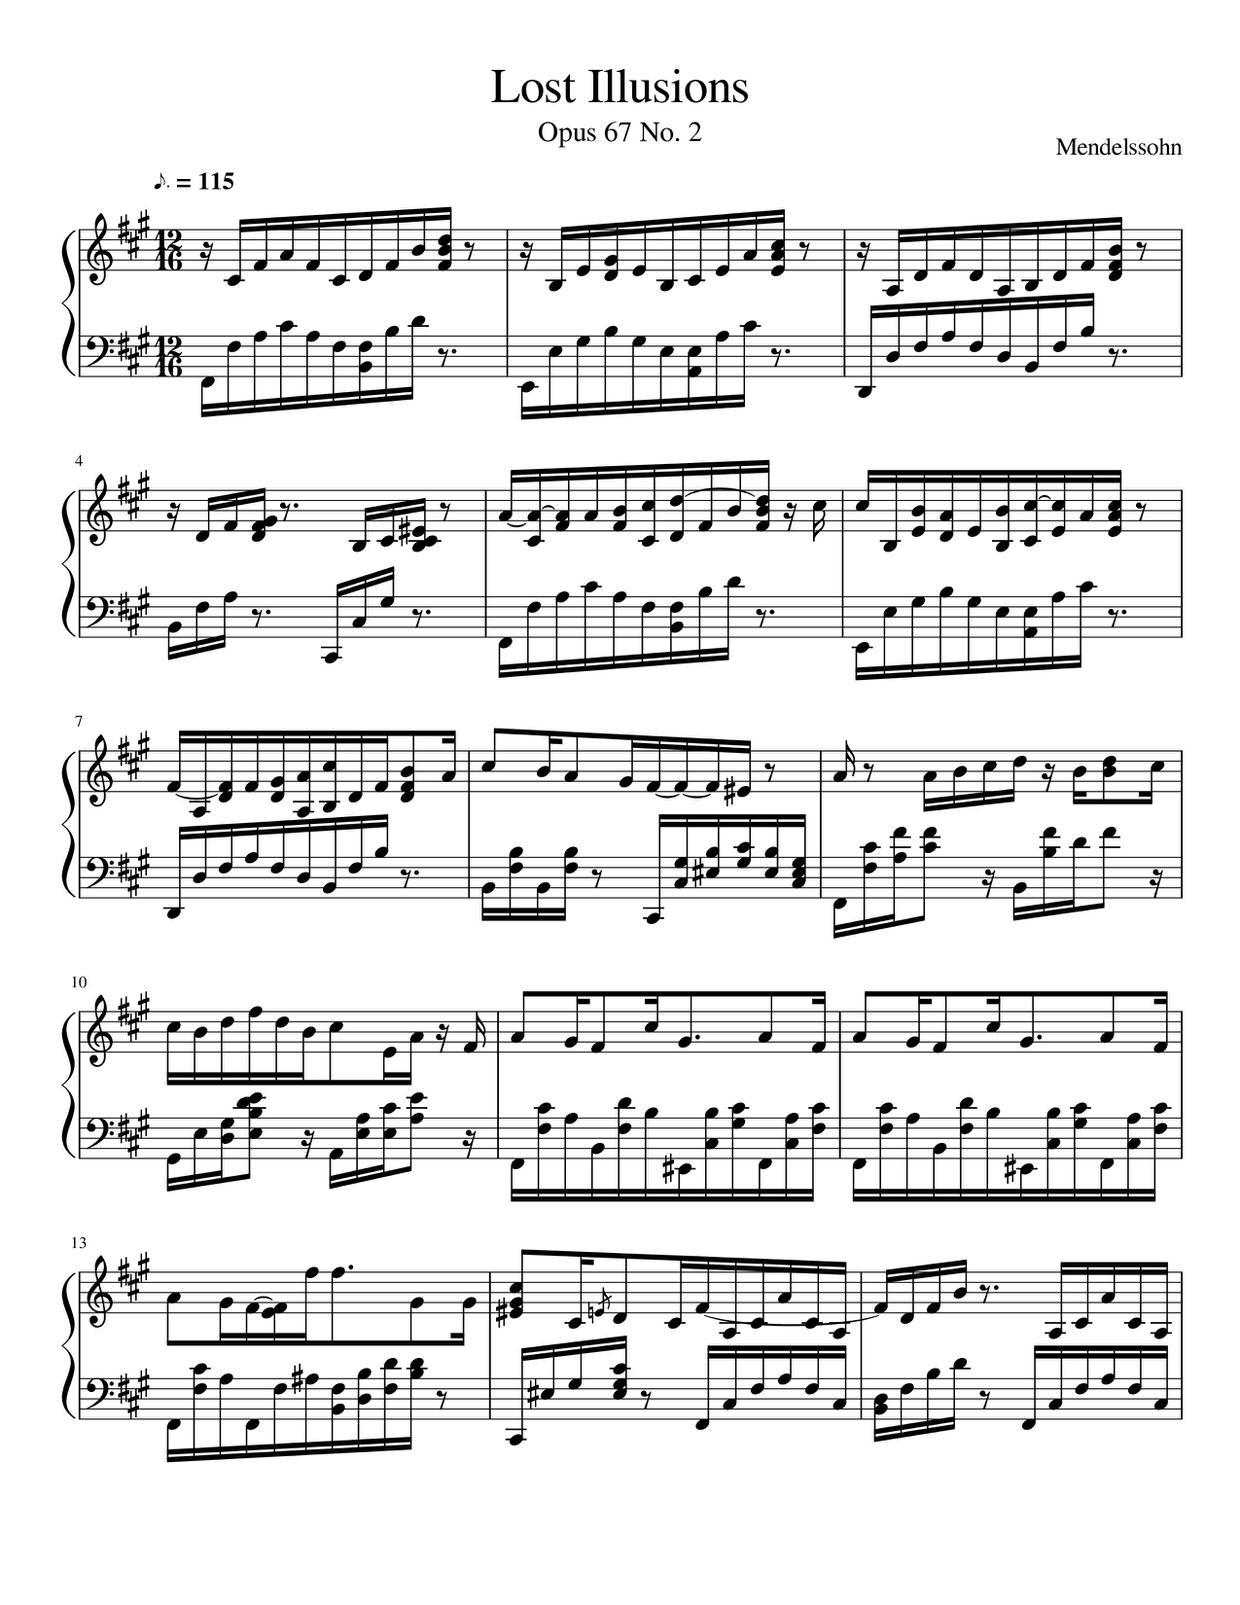 Songs Without Words, Book VI Opus 67: No. 2 in F-Sharp Minor琴譜